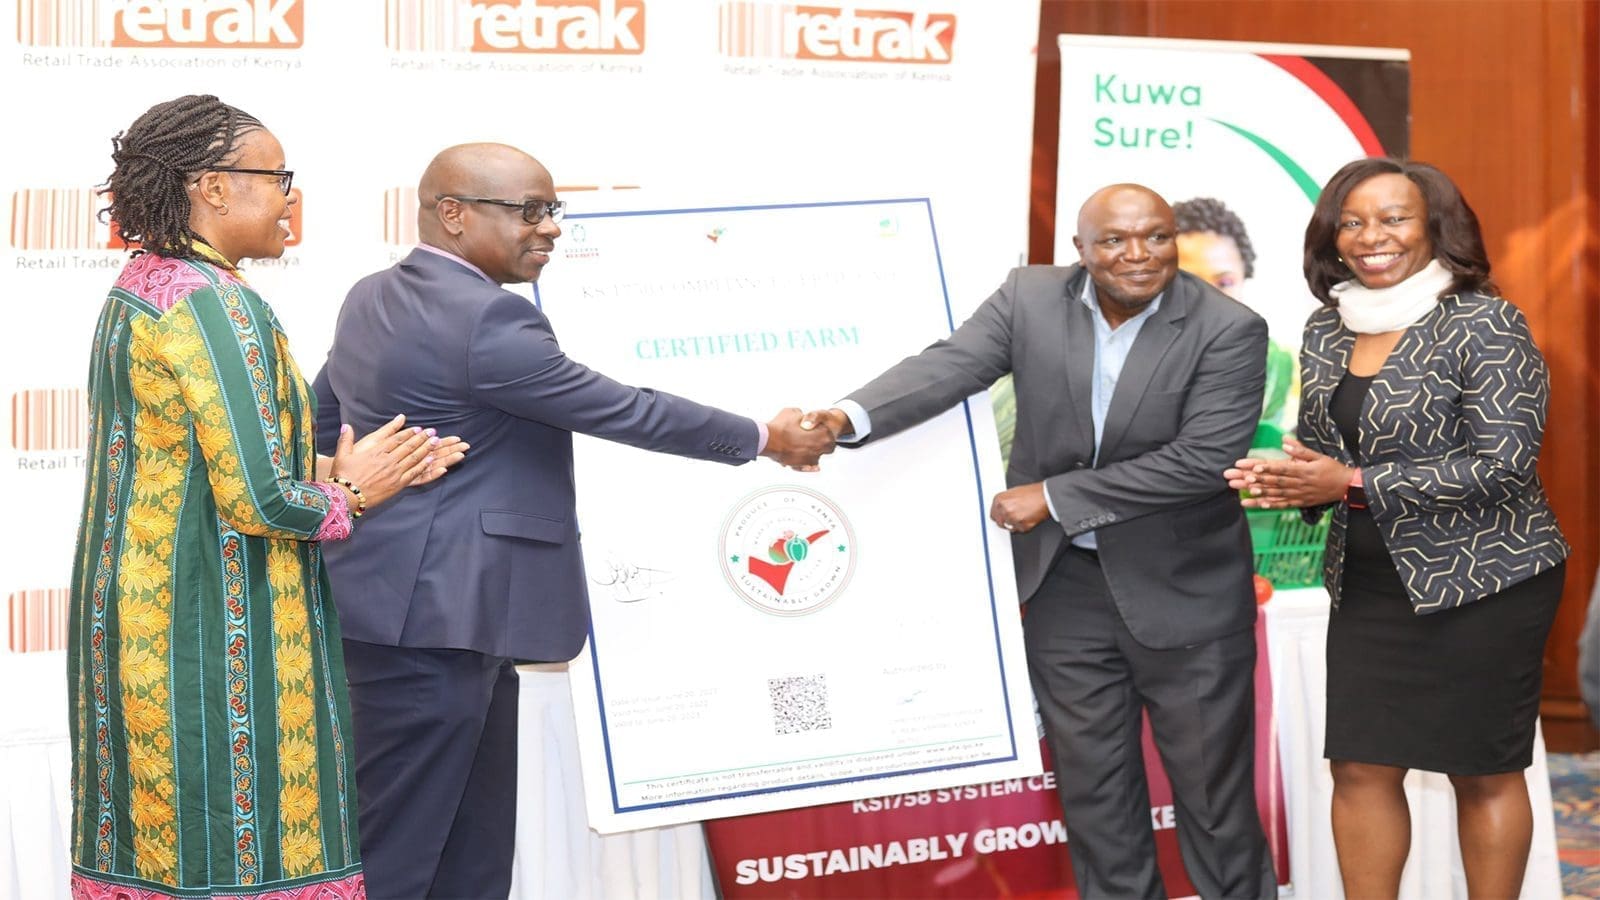 Agriculture and Food Authority, Retail Trade Association of Kenya launch KS 1758 Standard